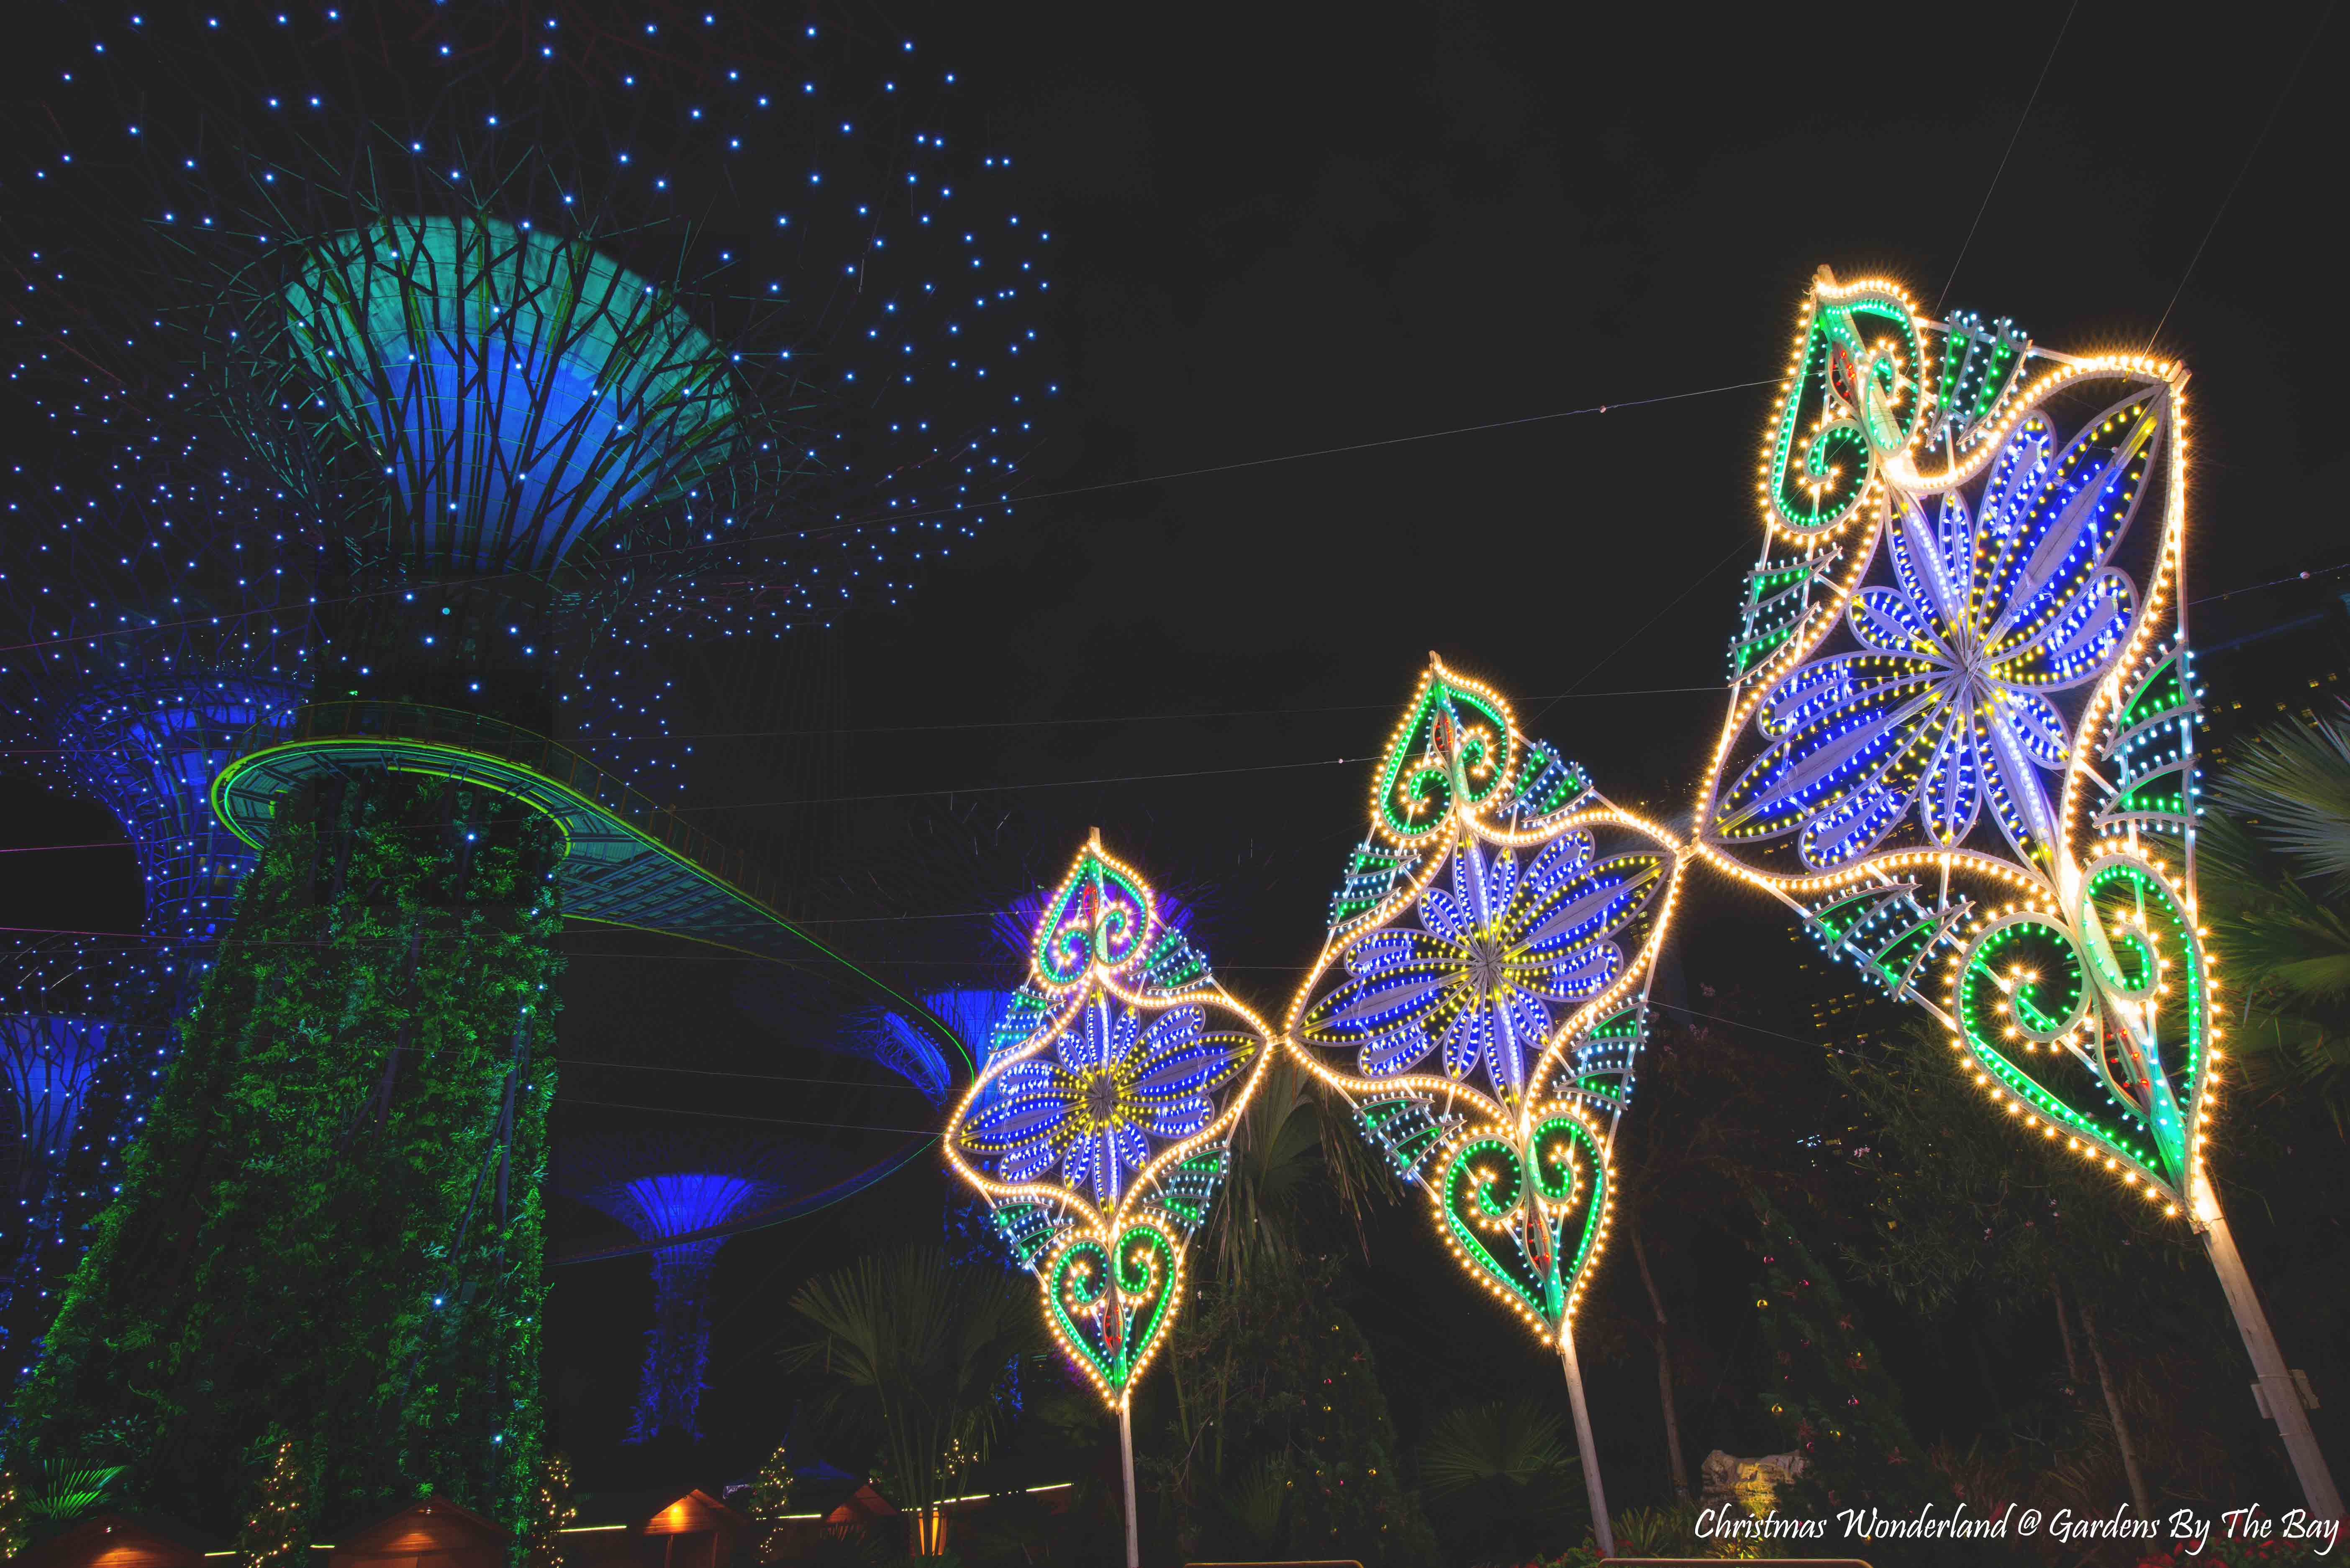 Christmas Countdown Checklists at Gardens By The Bay - Alvinology